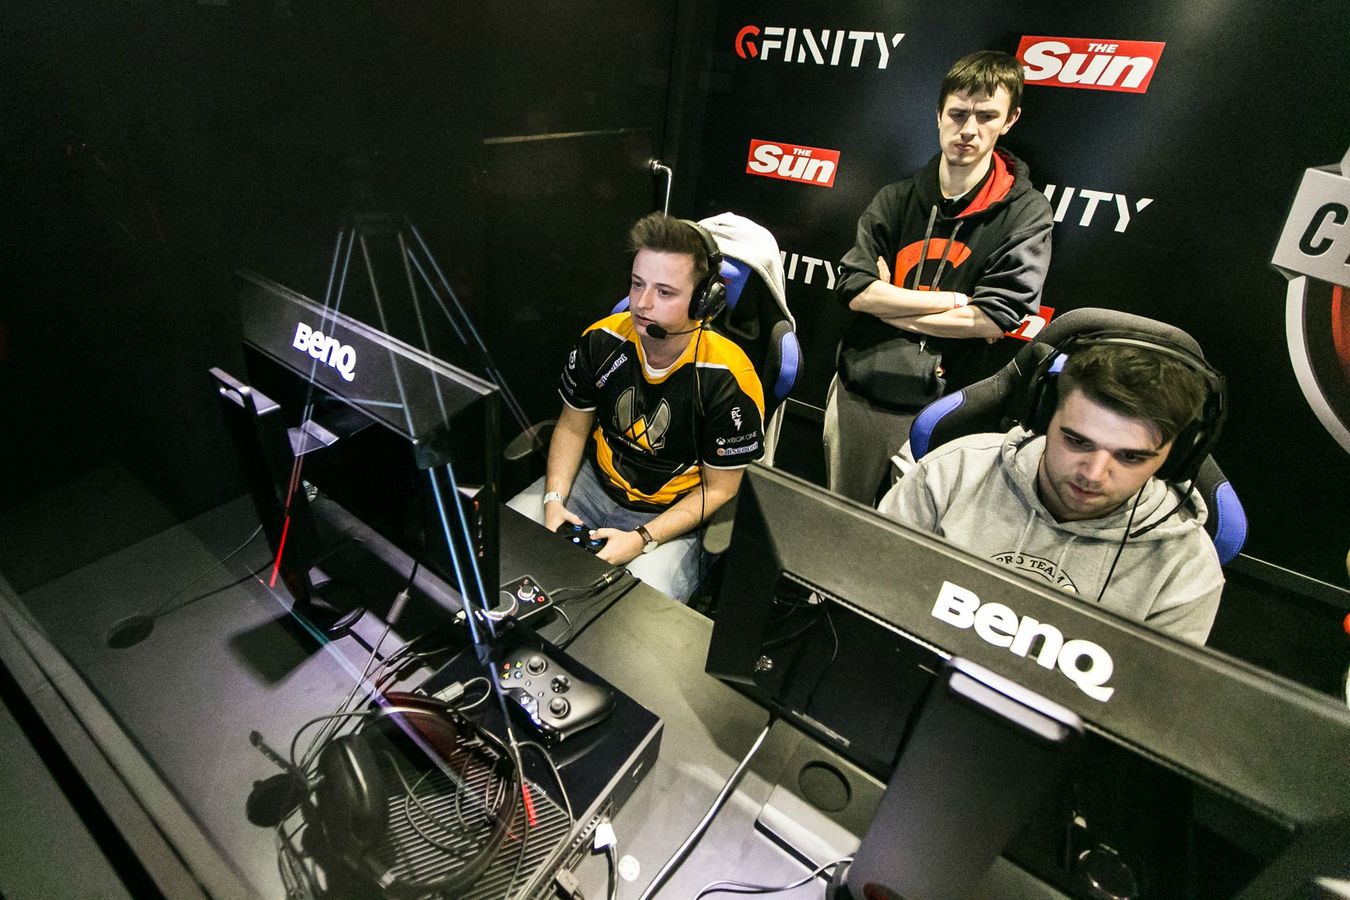 Tommey representing Vitality at the Gfinity Spring Masters.